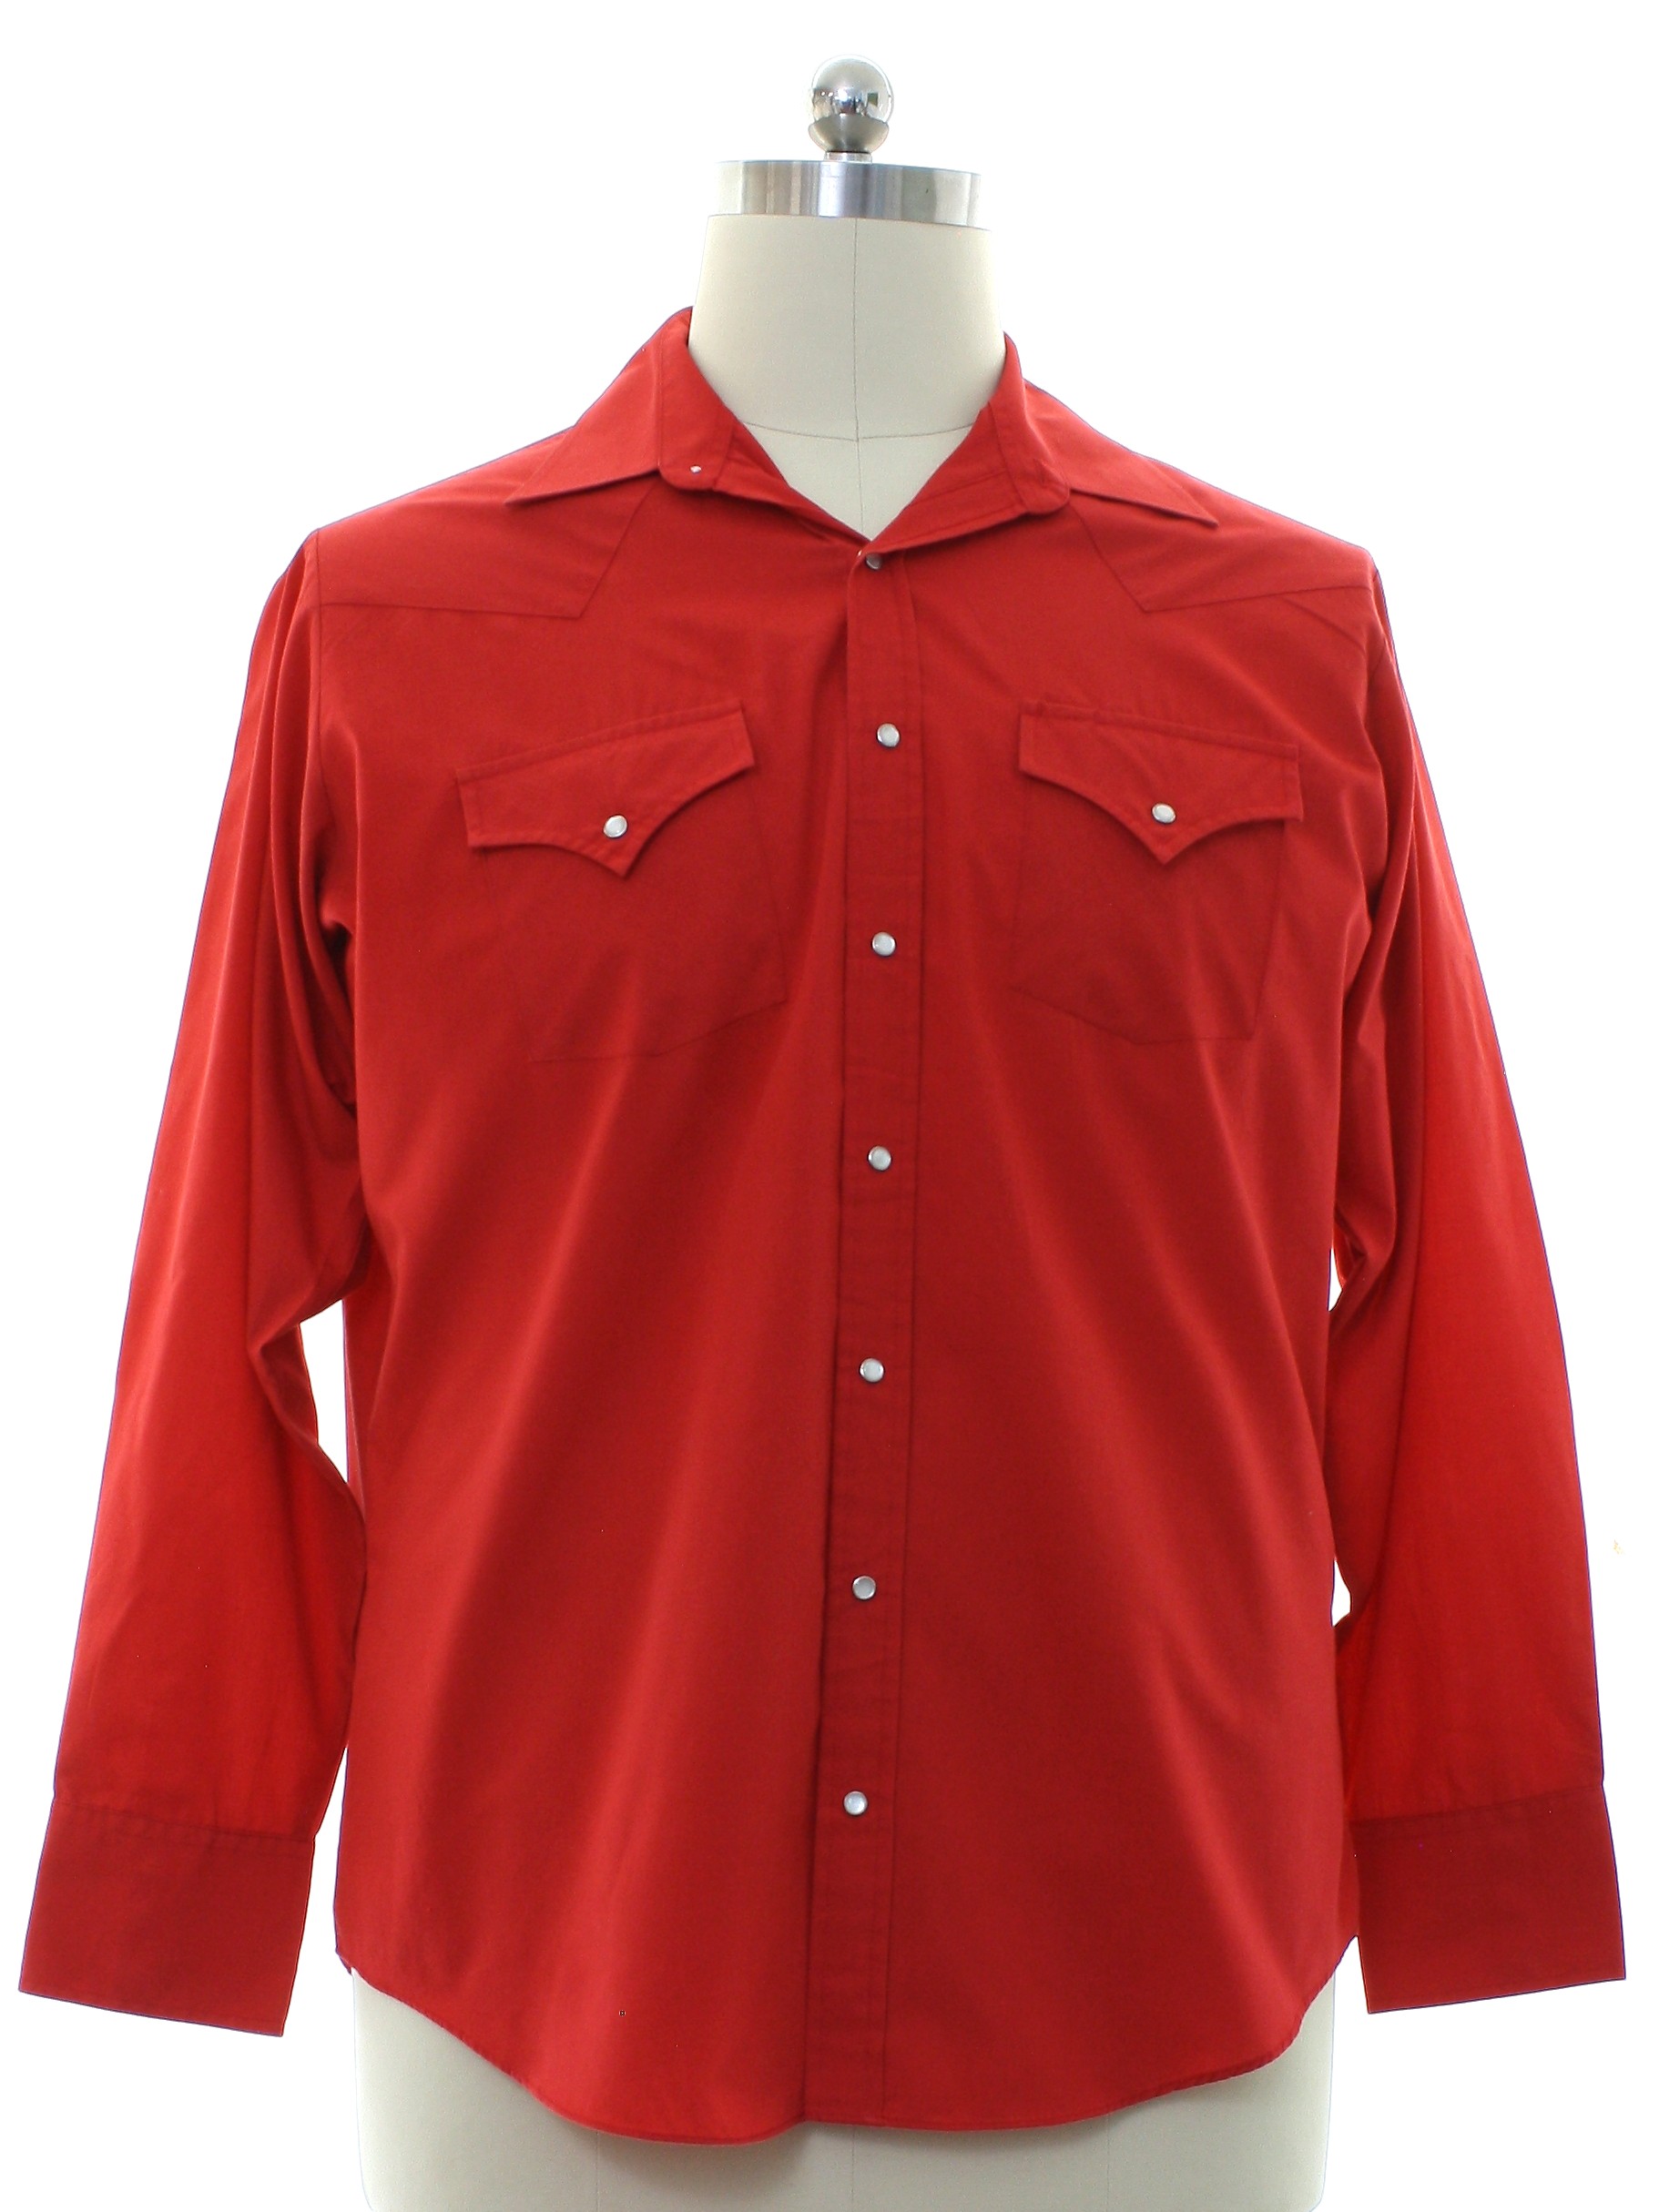 Western Shirt: 90s -Sheplers- Mens red background polyester cotton ...